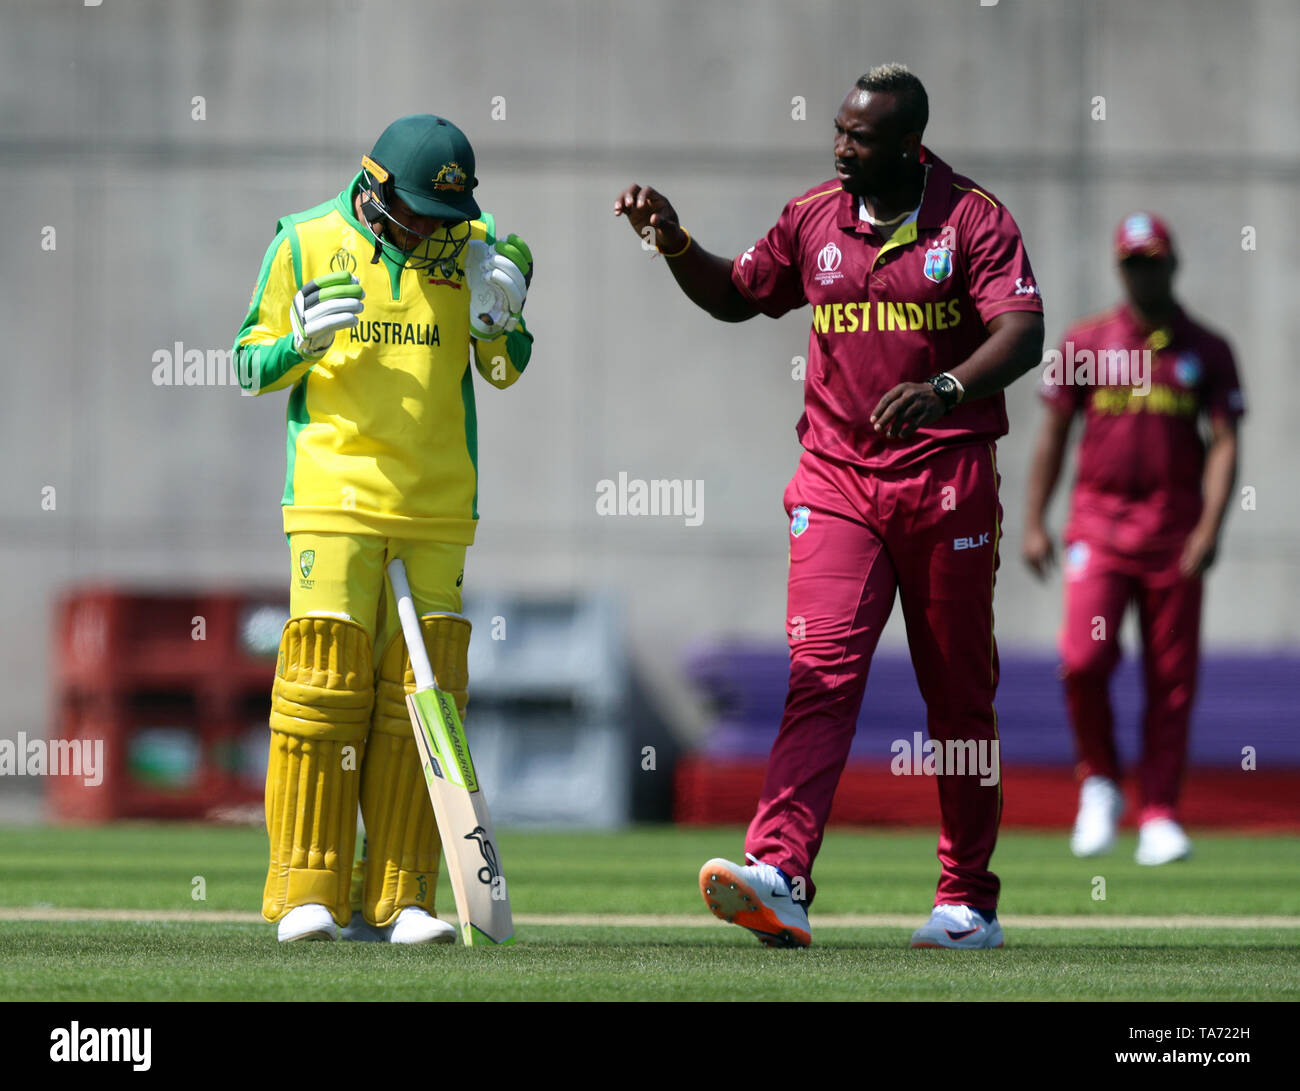 West Indies Andre Russell (right) checks on Australias Usman Khawaja (left) after hitting him on the head with a bouncer during the World Cup warm-up match at the Nursery Ground, Southampton Stock